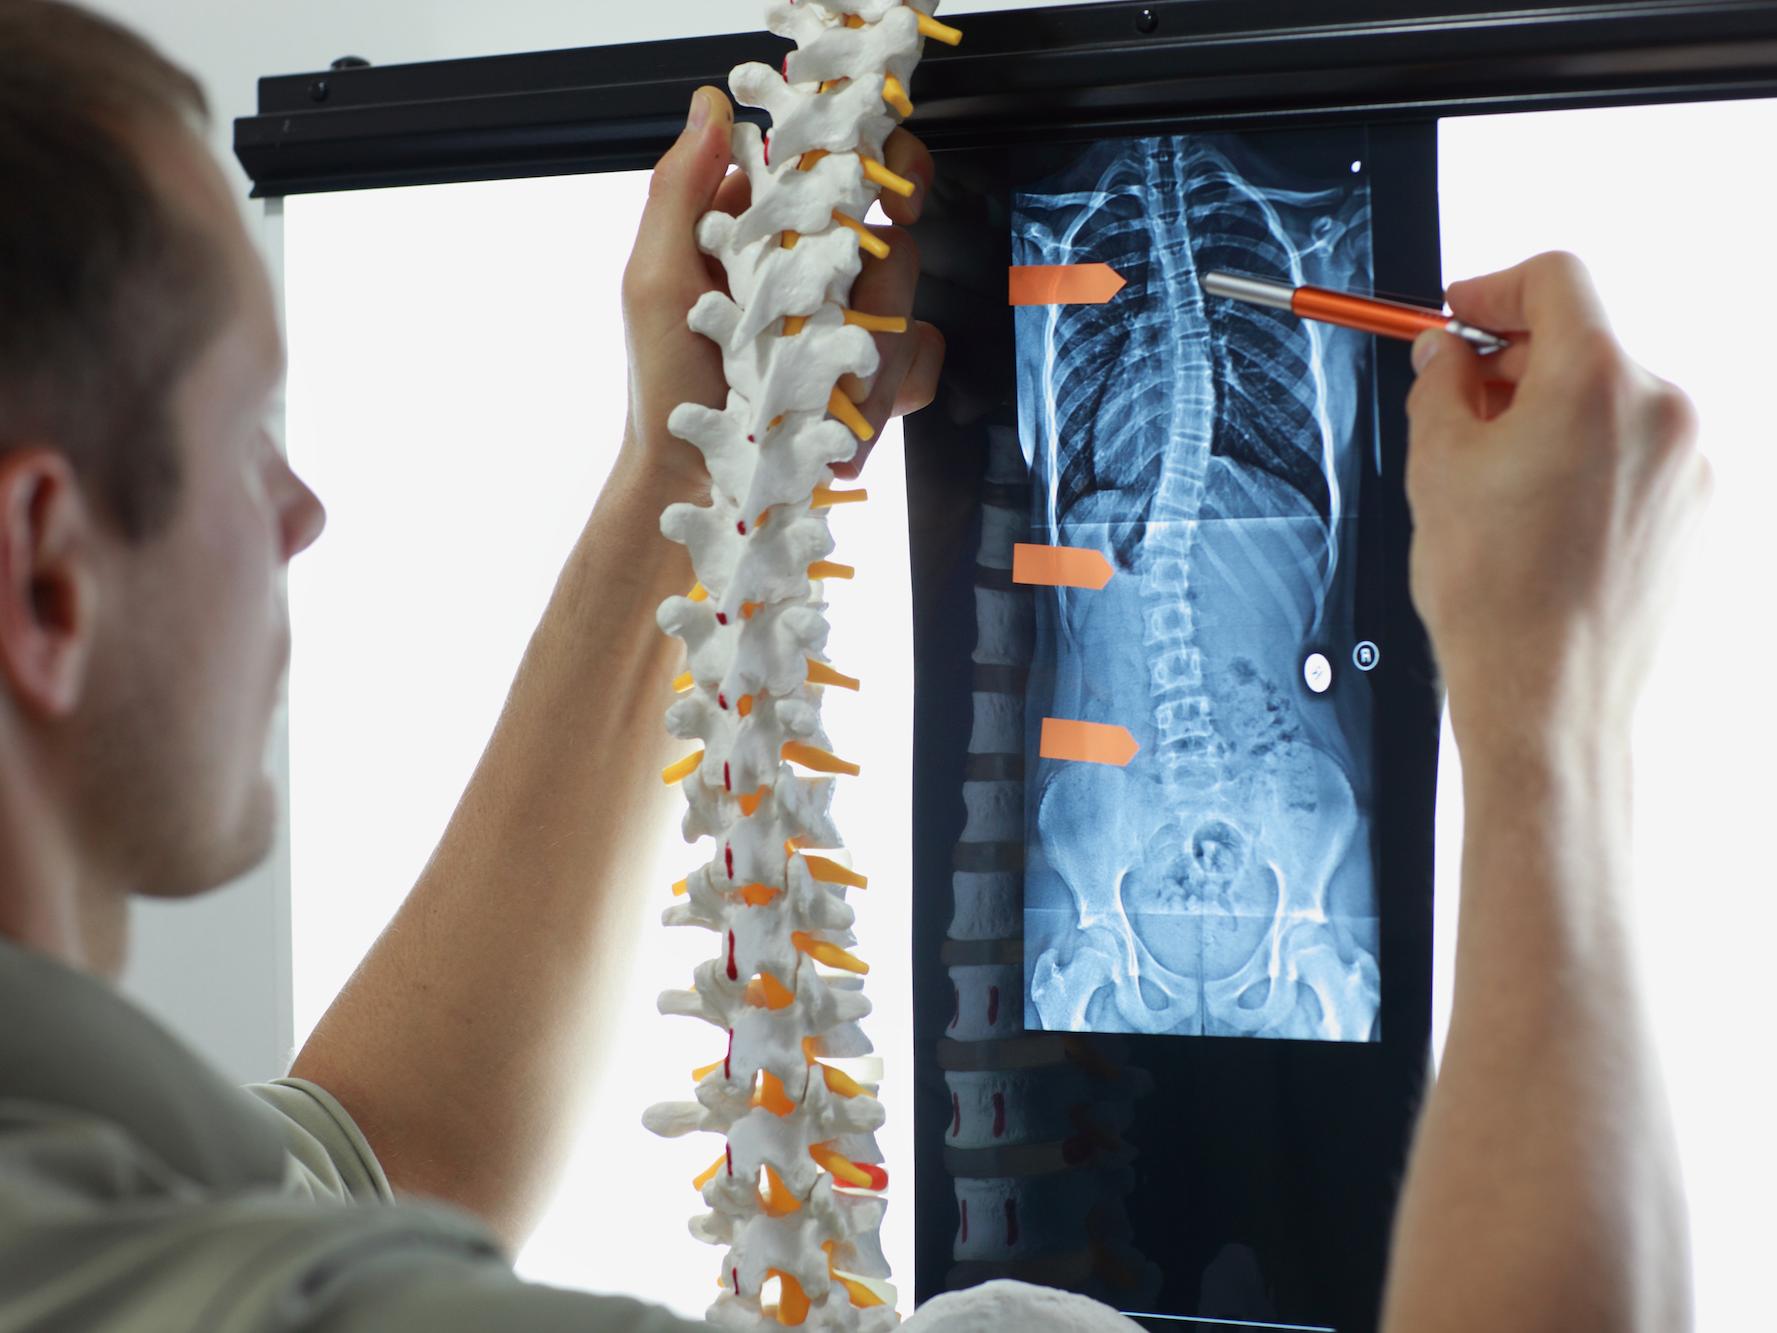 A health professional reads a spine x-ray